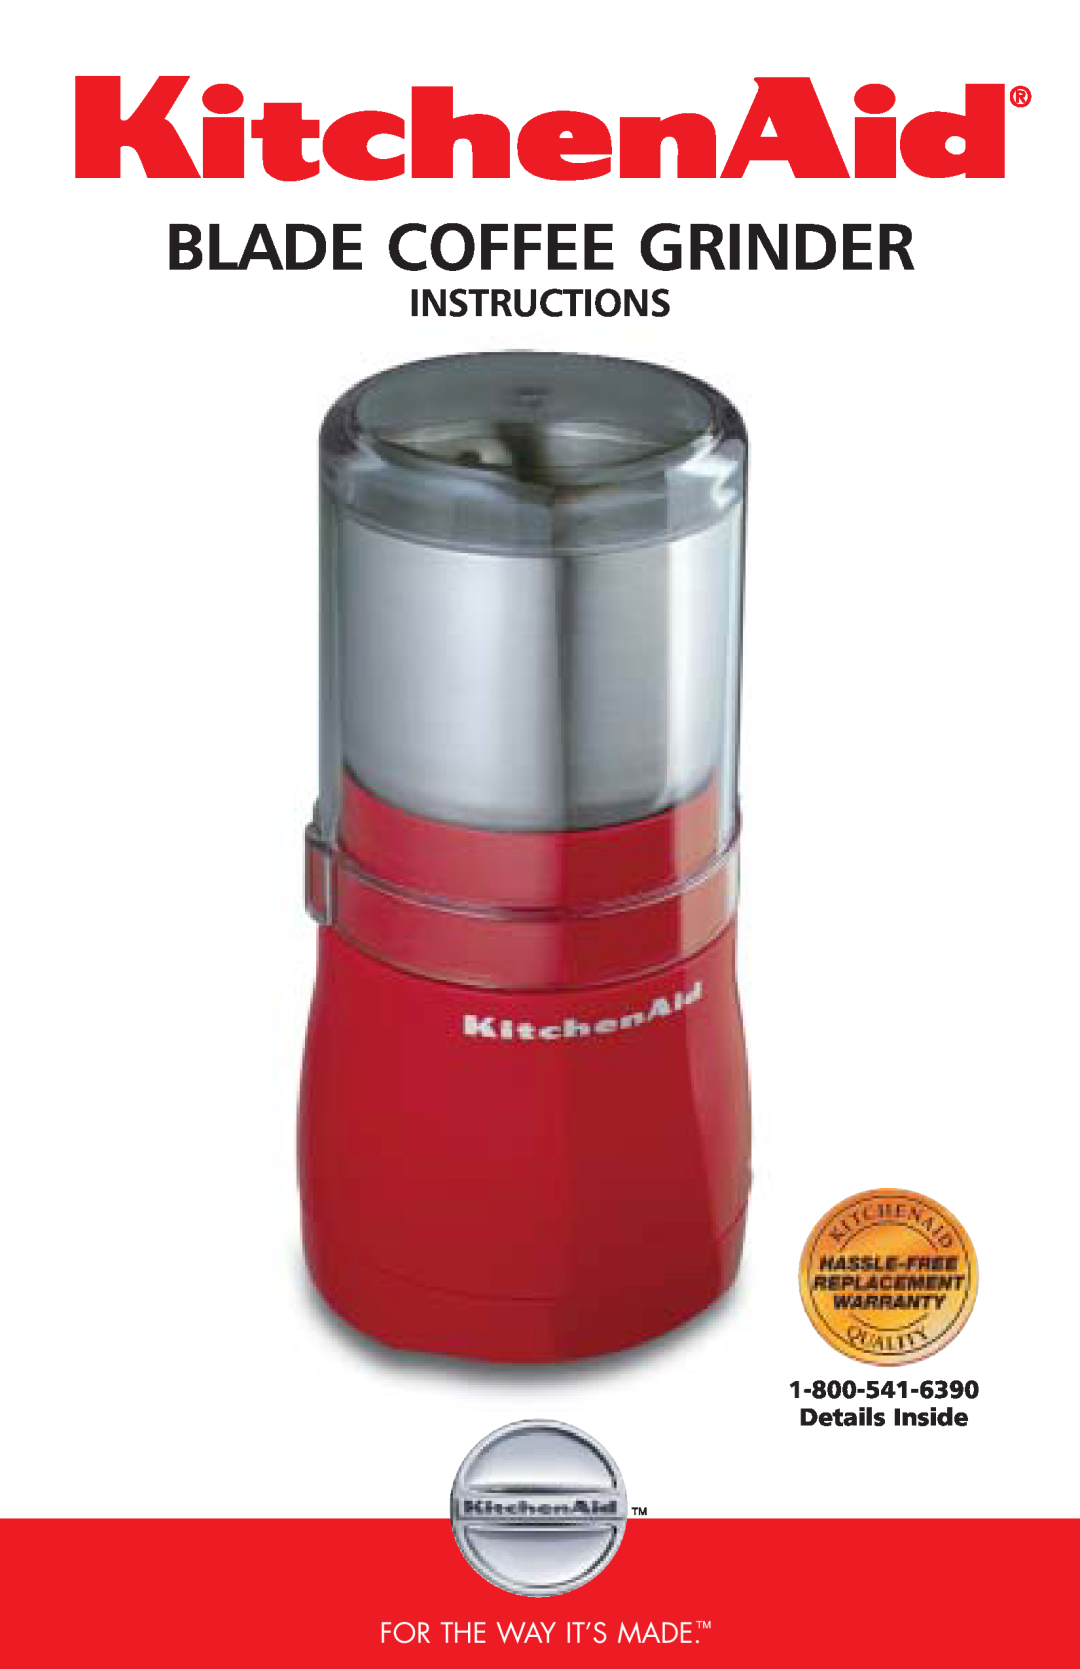 KitchenAid 2633 manual Blade Coffee Grinder, Instructions, For The Way It’S Made, Details Inside 